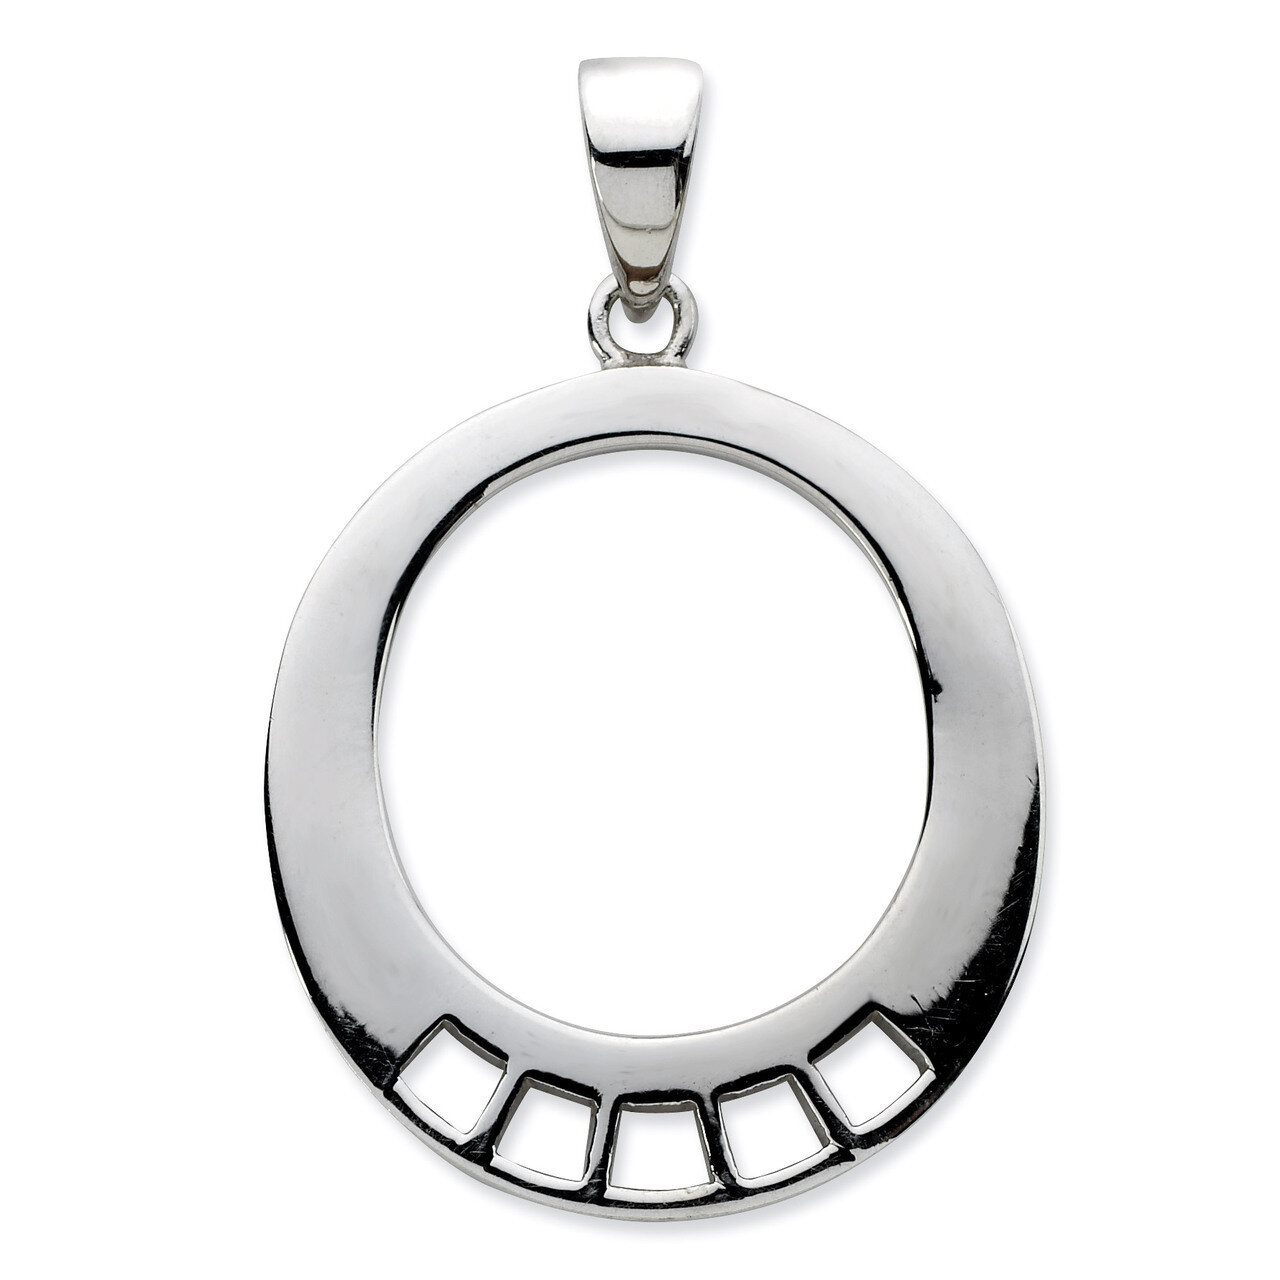 Oval Shaped Charm Carrier Pendant Sterling Silver QCC625